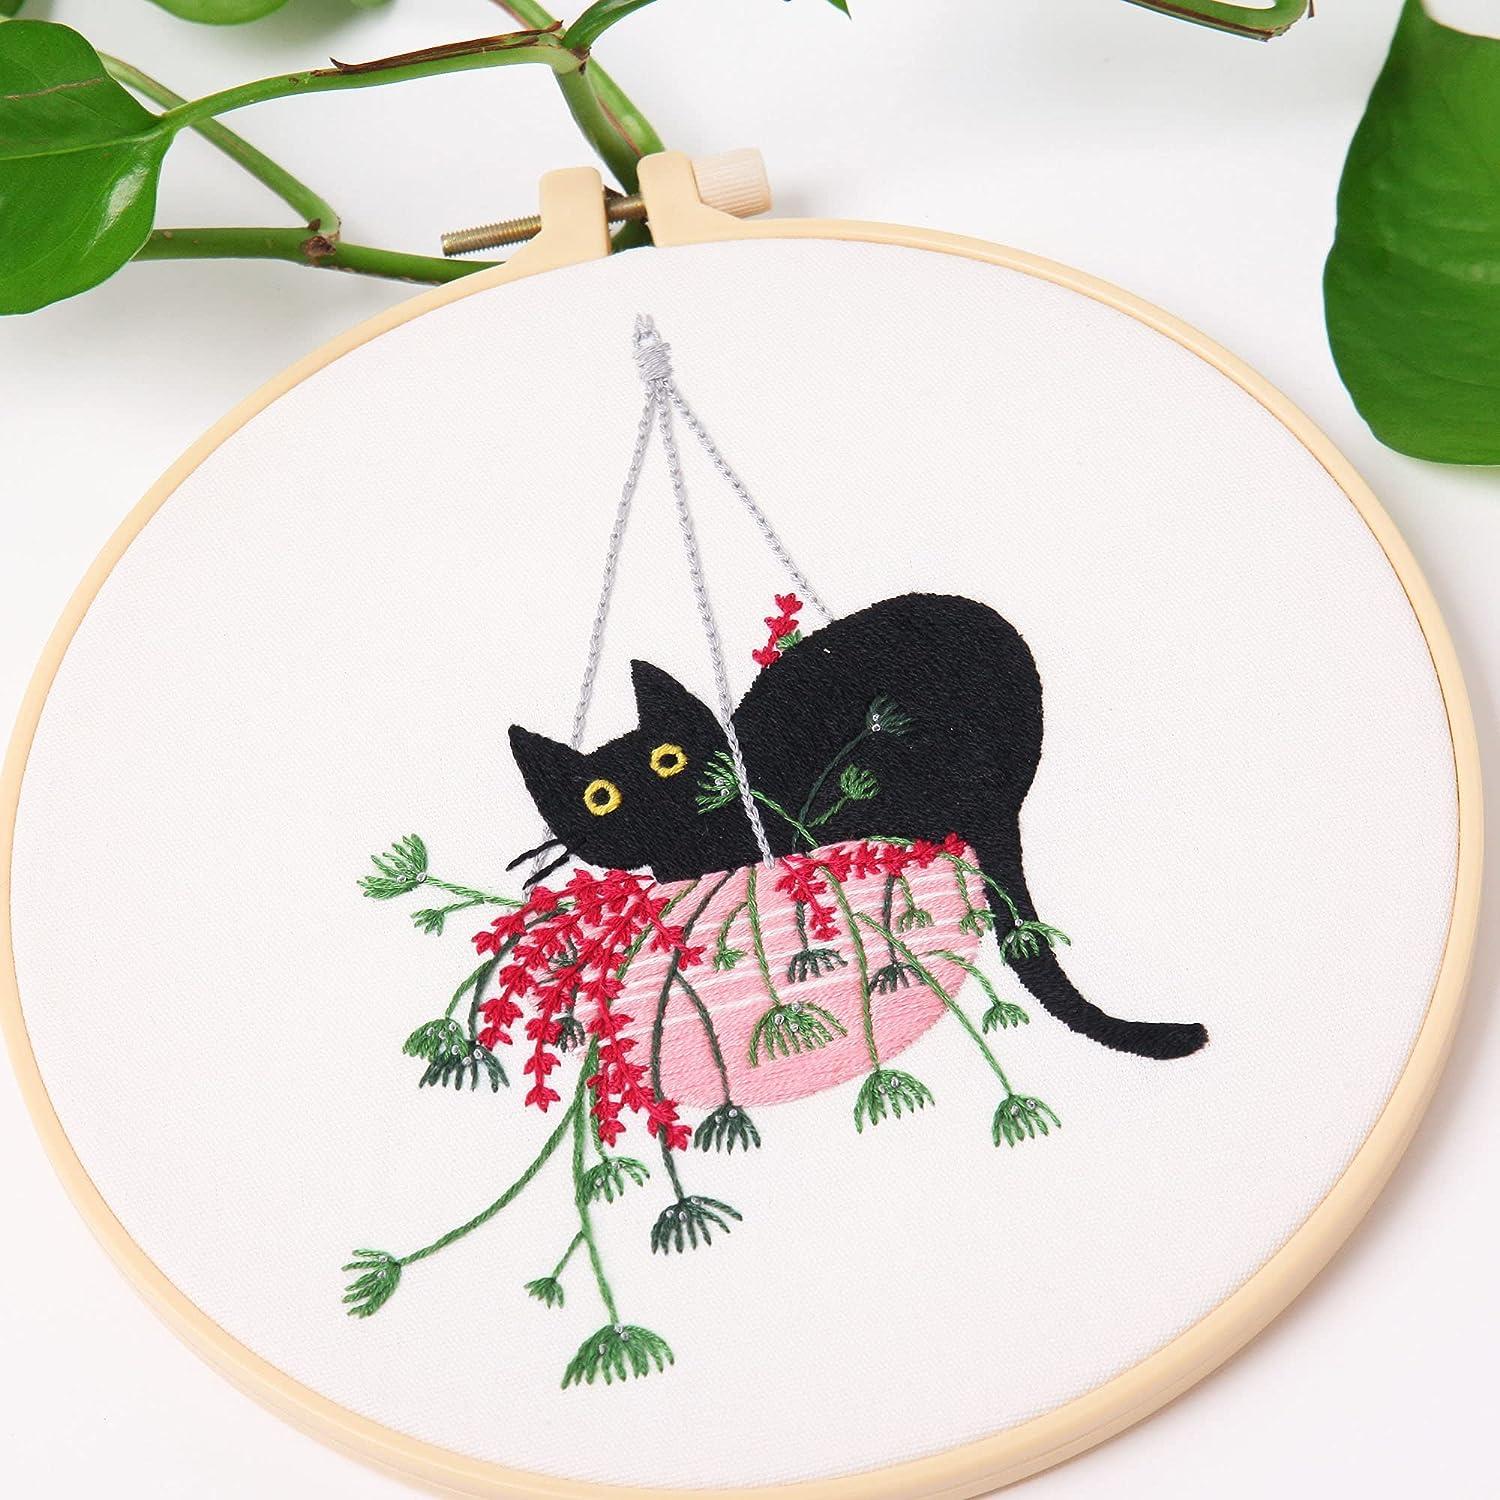 Embroidery Starter kit with Patterns and Instructions, DIY Adult